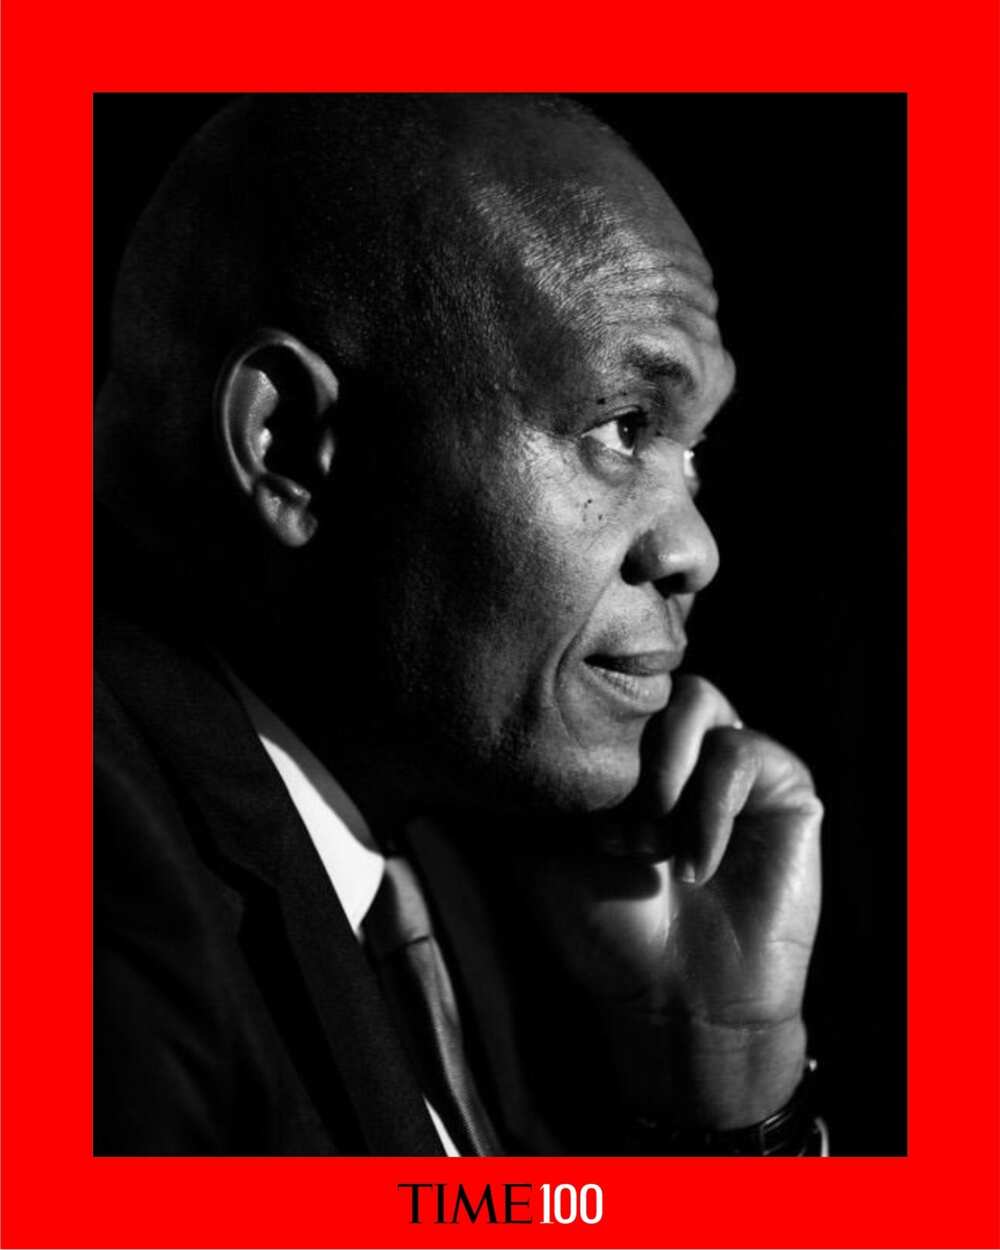 Tony Elumelu named in ‘TIME 100’ list of the 100 most influential people in the world 2020